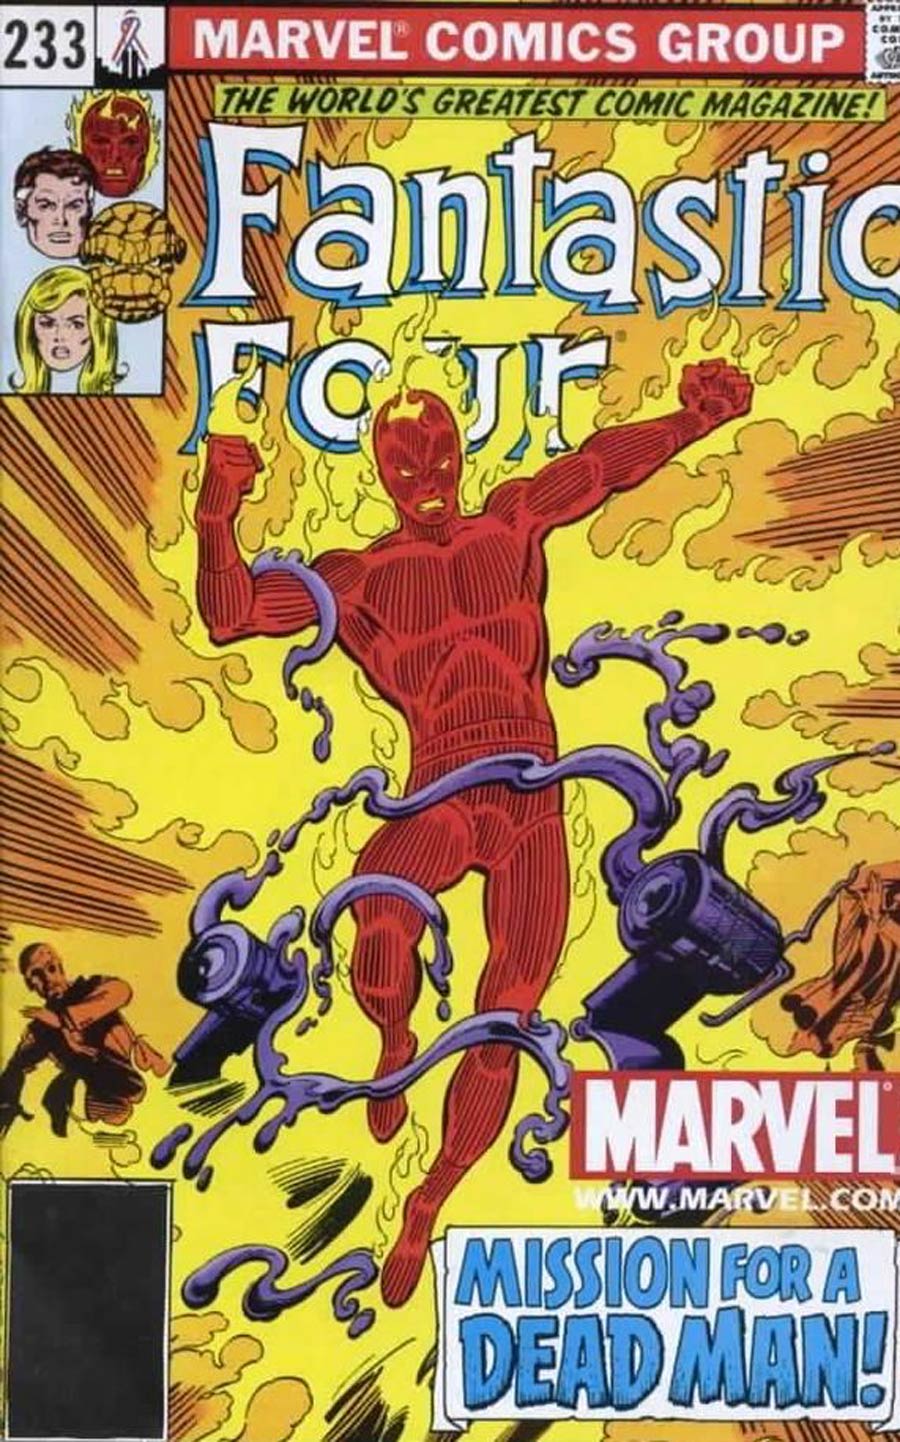 Fantastic Four #233 Cover B Toy Reprint